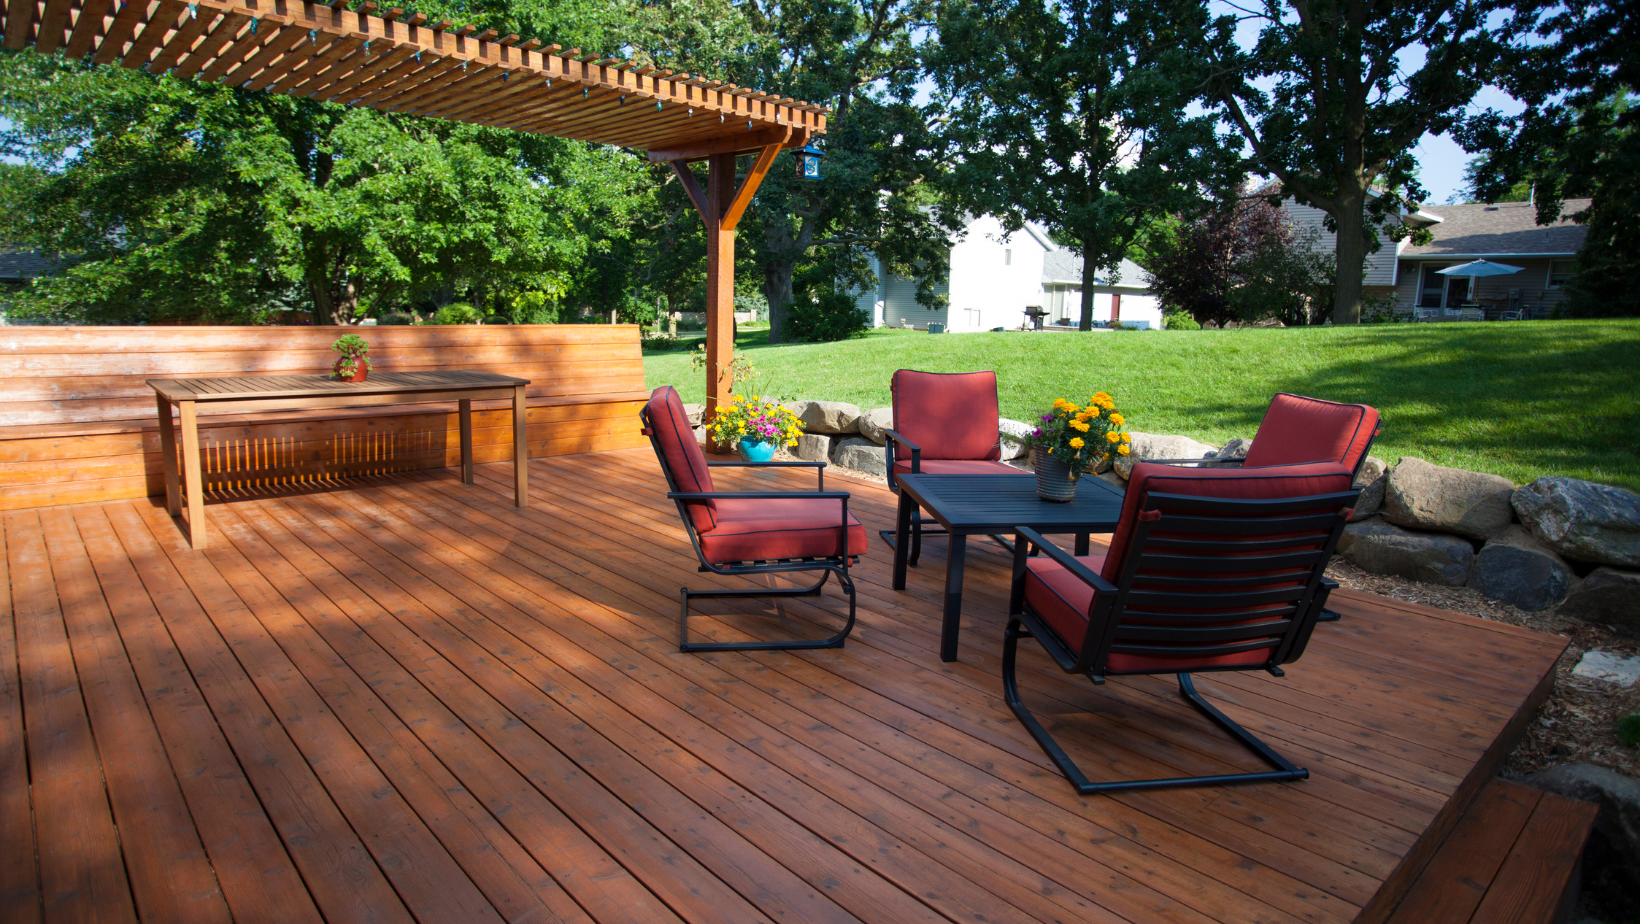 Outdoor wooden deck with a table, four red chairs and yellow flowers